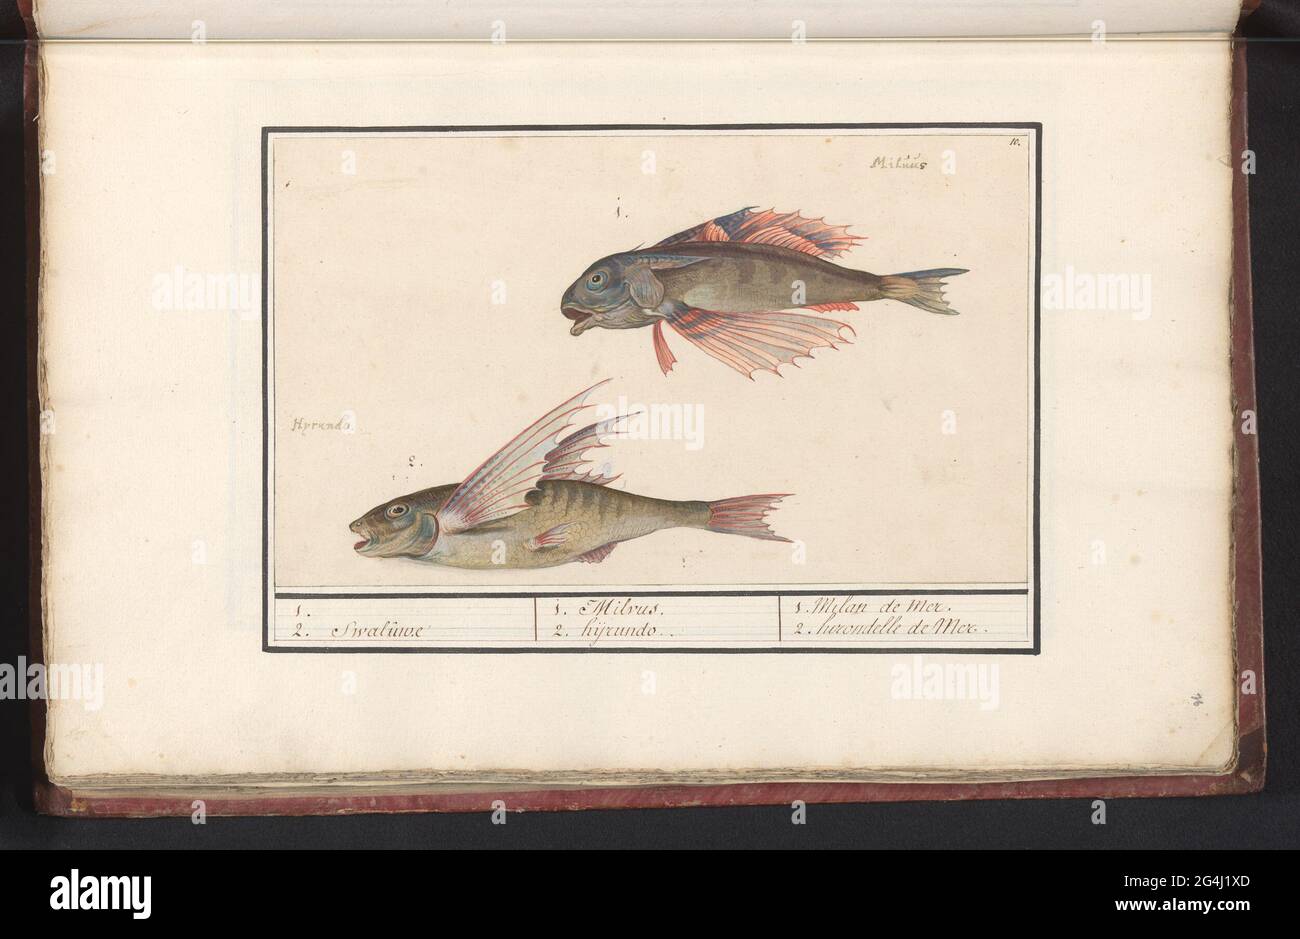 Red poon (Chelidonichthys Lucerna) and flying fish (Exacoetidae); 1. 2. Swaluwe / 1. Milvus 2. Hyrundo. / 1. Milan de Mer 2. Hirondelle de Mer. Red Poon and a flying fish. Numbered at the top right: 10. With the Latin names. Part of the sixth album with drawings of fish, shells and insects. Sixth of twelve albums with drawings of animals, birds and plants known around 1600, commissioned by Emperor Rudolf II. With explanation in Dutch, Latin and French. Stock Photo